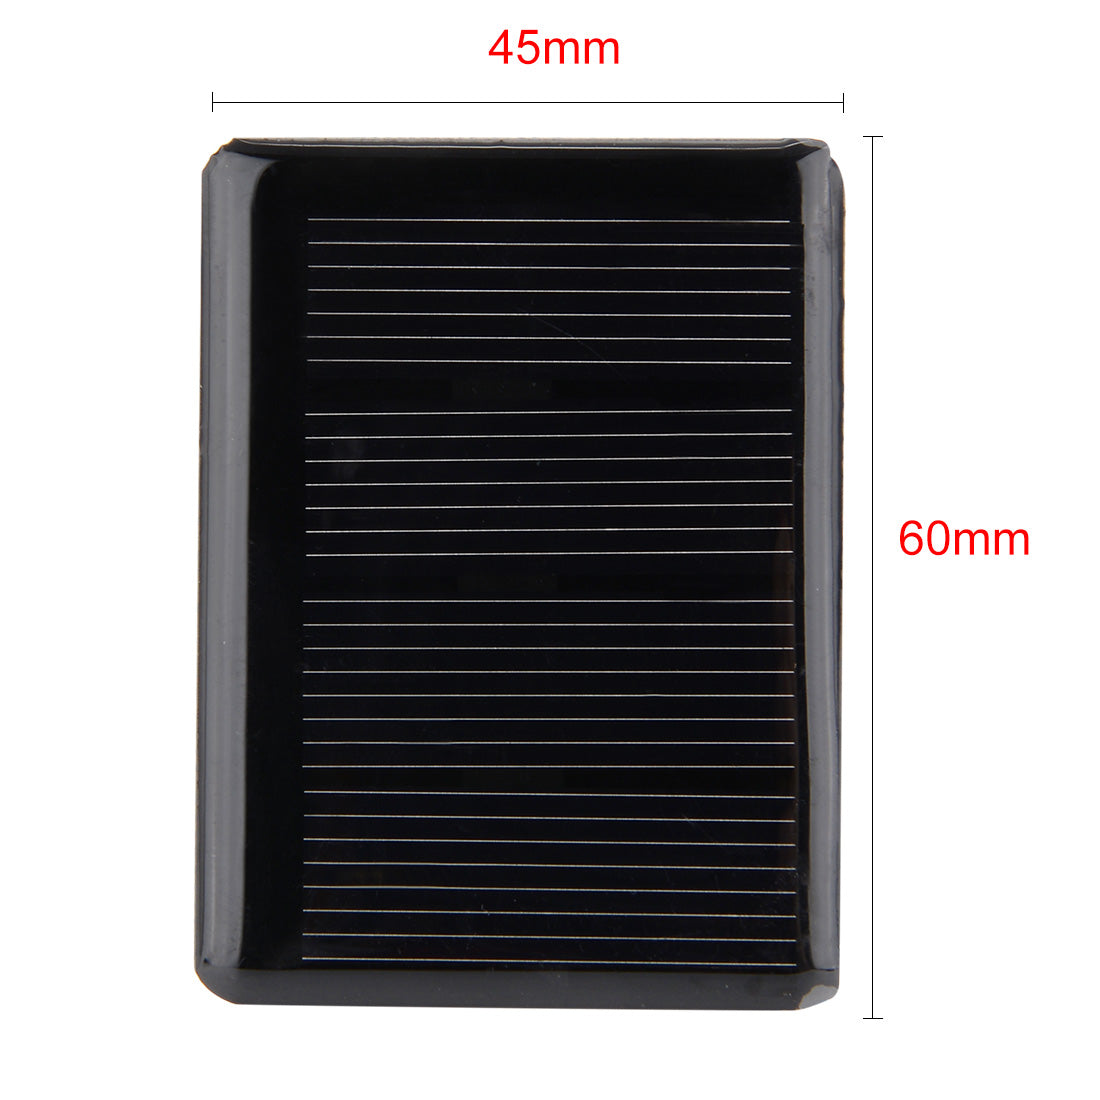 uxcell Uxcell 5Pcs 2V 120mA Poly Mini Solar Cell Panel Module DIY for Phone Light Toys Charger 60mm x 45mm